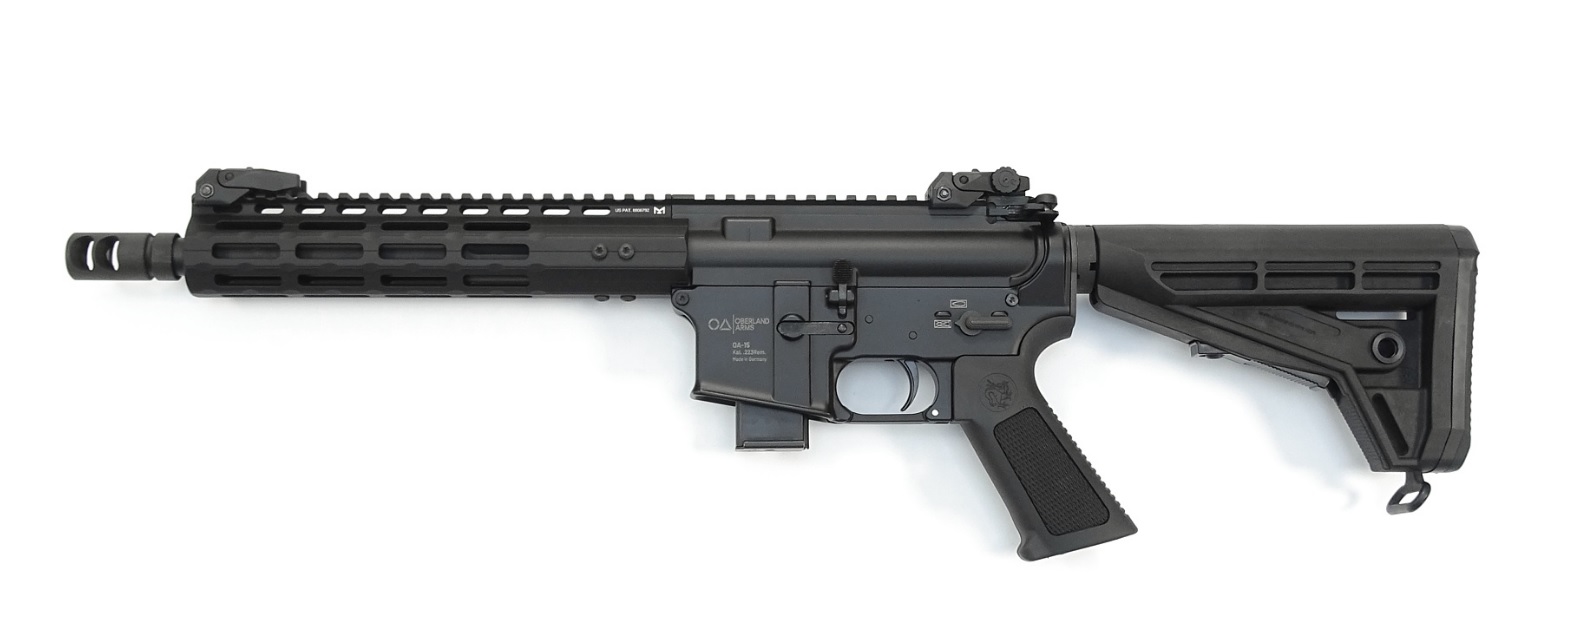 Oberland Arms OA-15 C9 BL